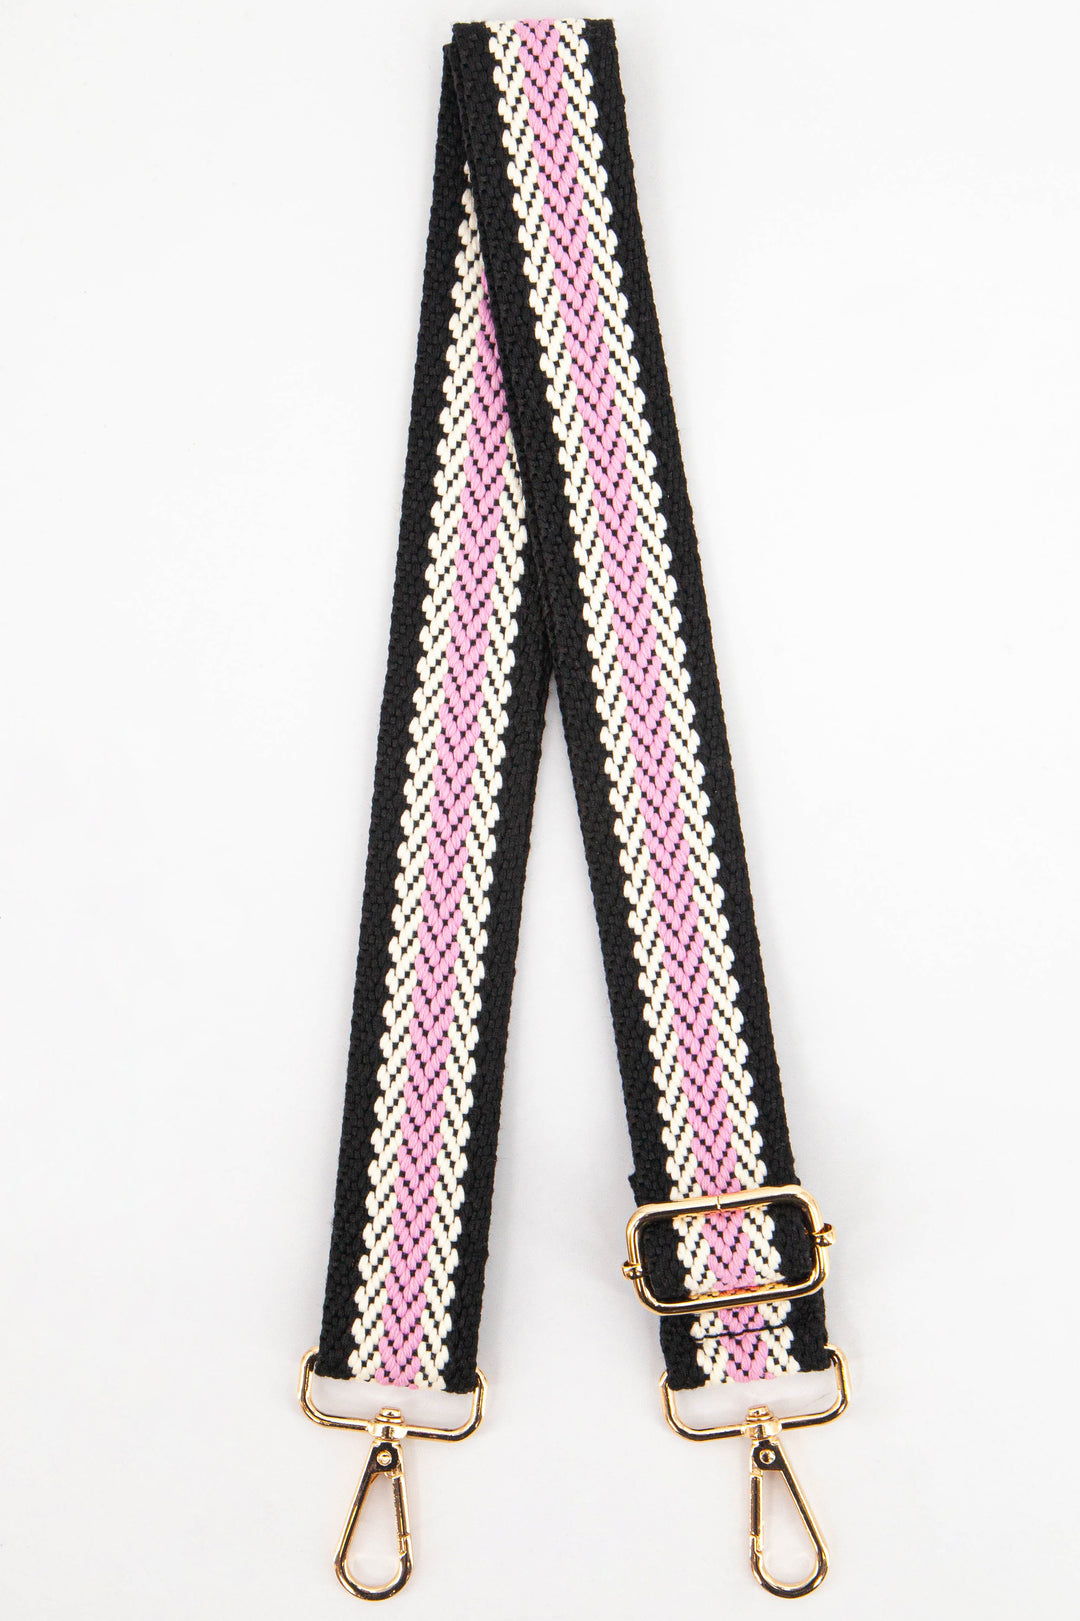 black and pink woven chevron stripe bag strap with gold clip on snap hooks for easy attachment